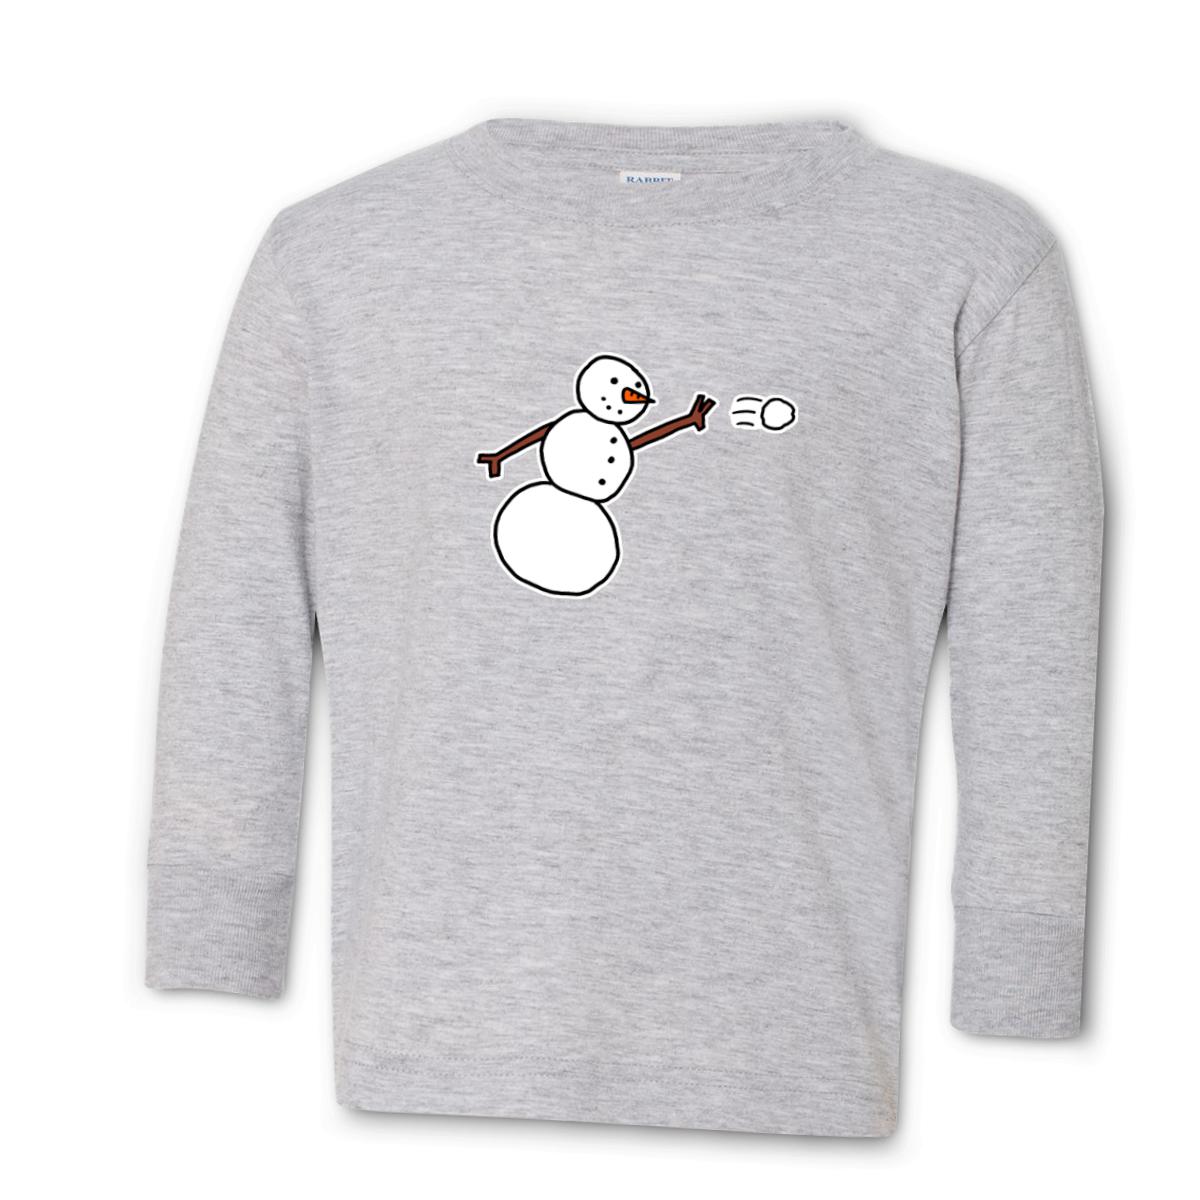 Snowman Throwing Snowball Toddler Long Sleeve Tee 2T heather